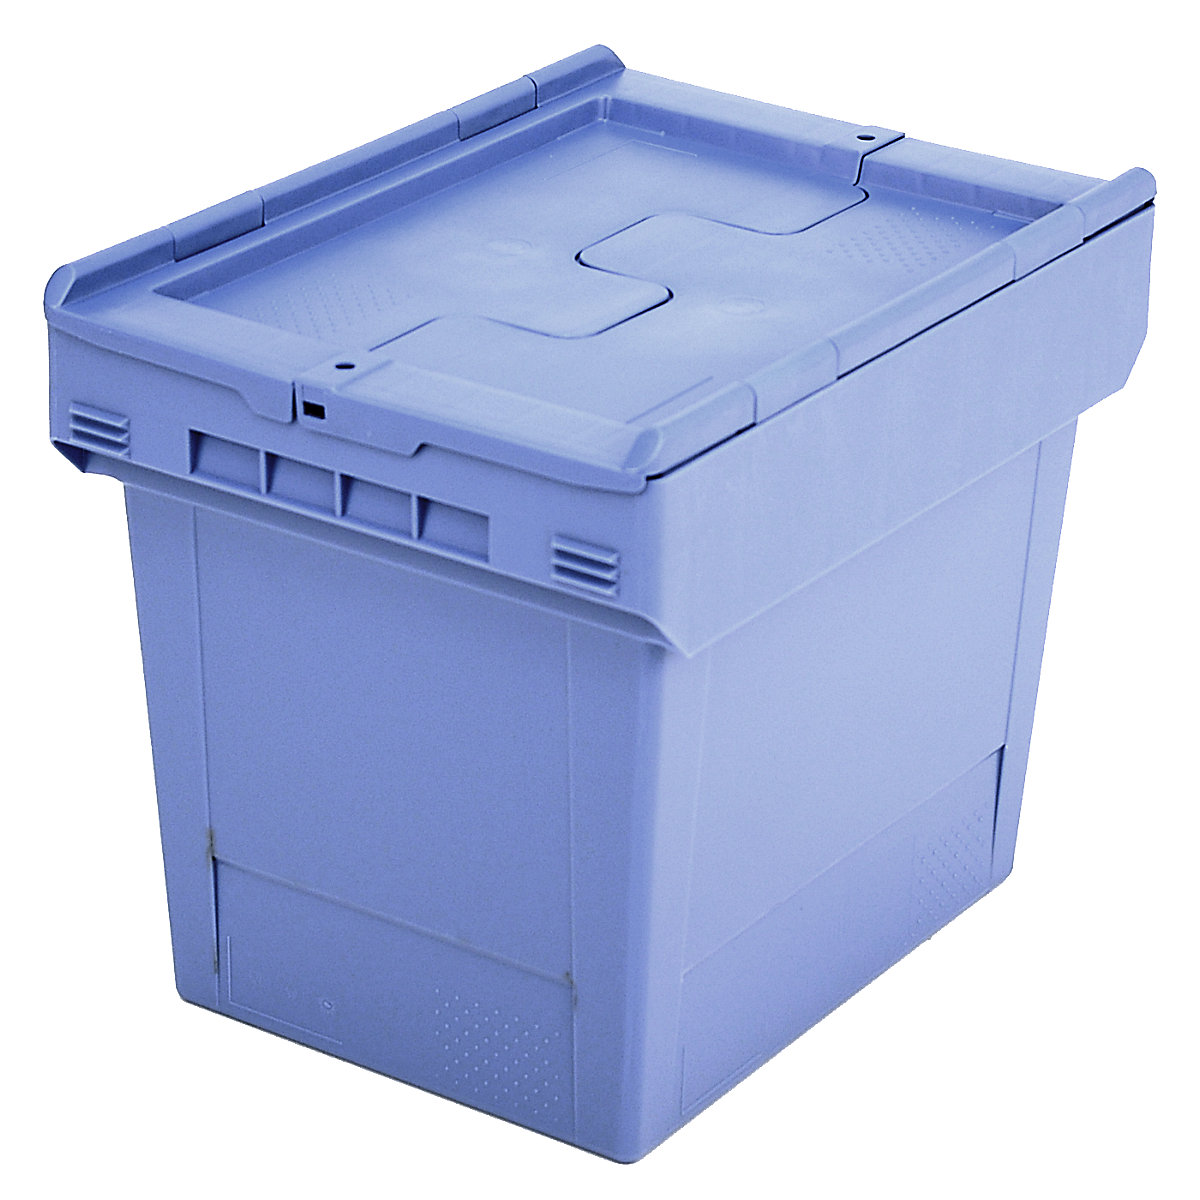 Reusable stacking container with folding lid – BITO